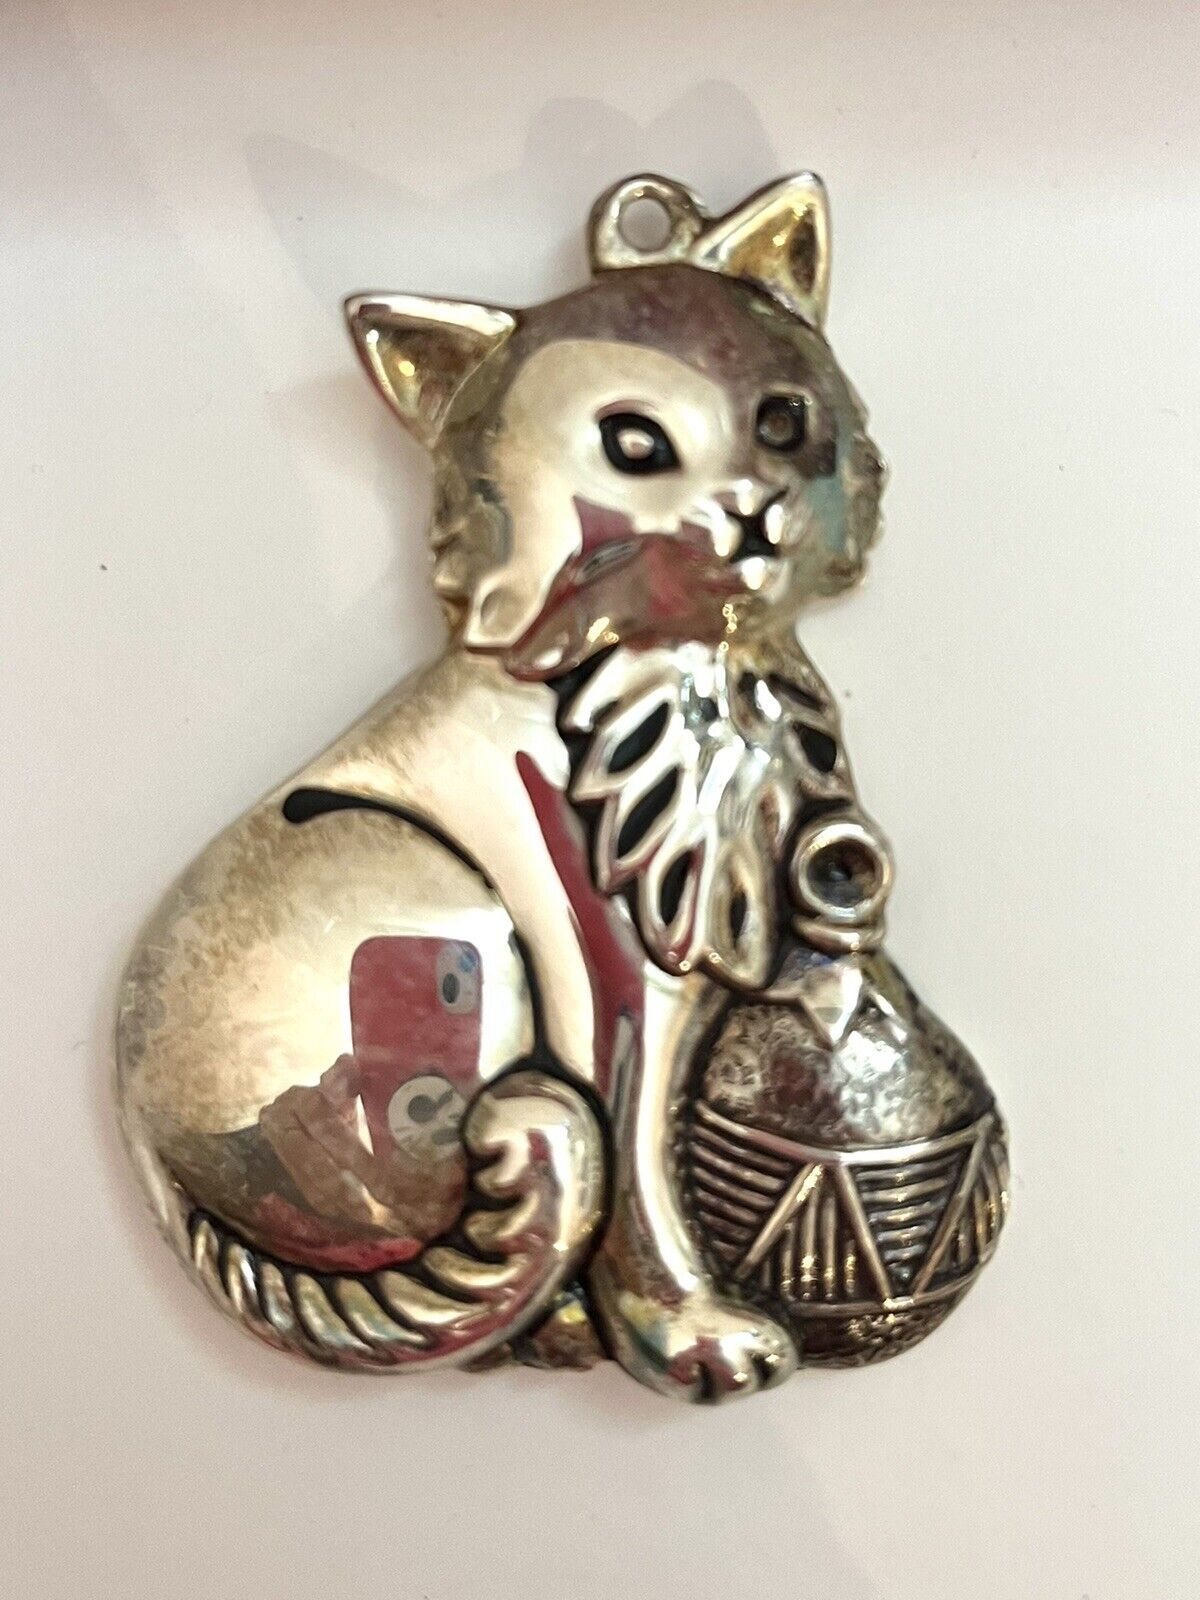 Vintage Gorham Cat Christmas Ornaments - Set of 3 Silver Plated Kittens